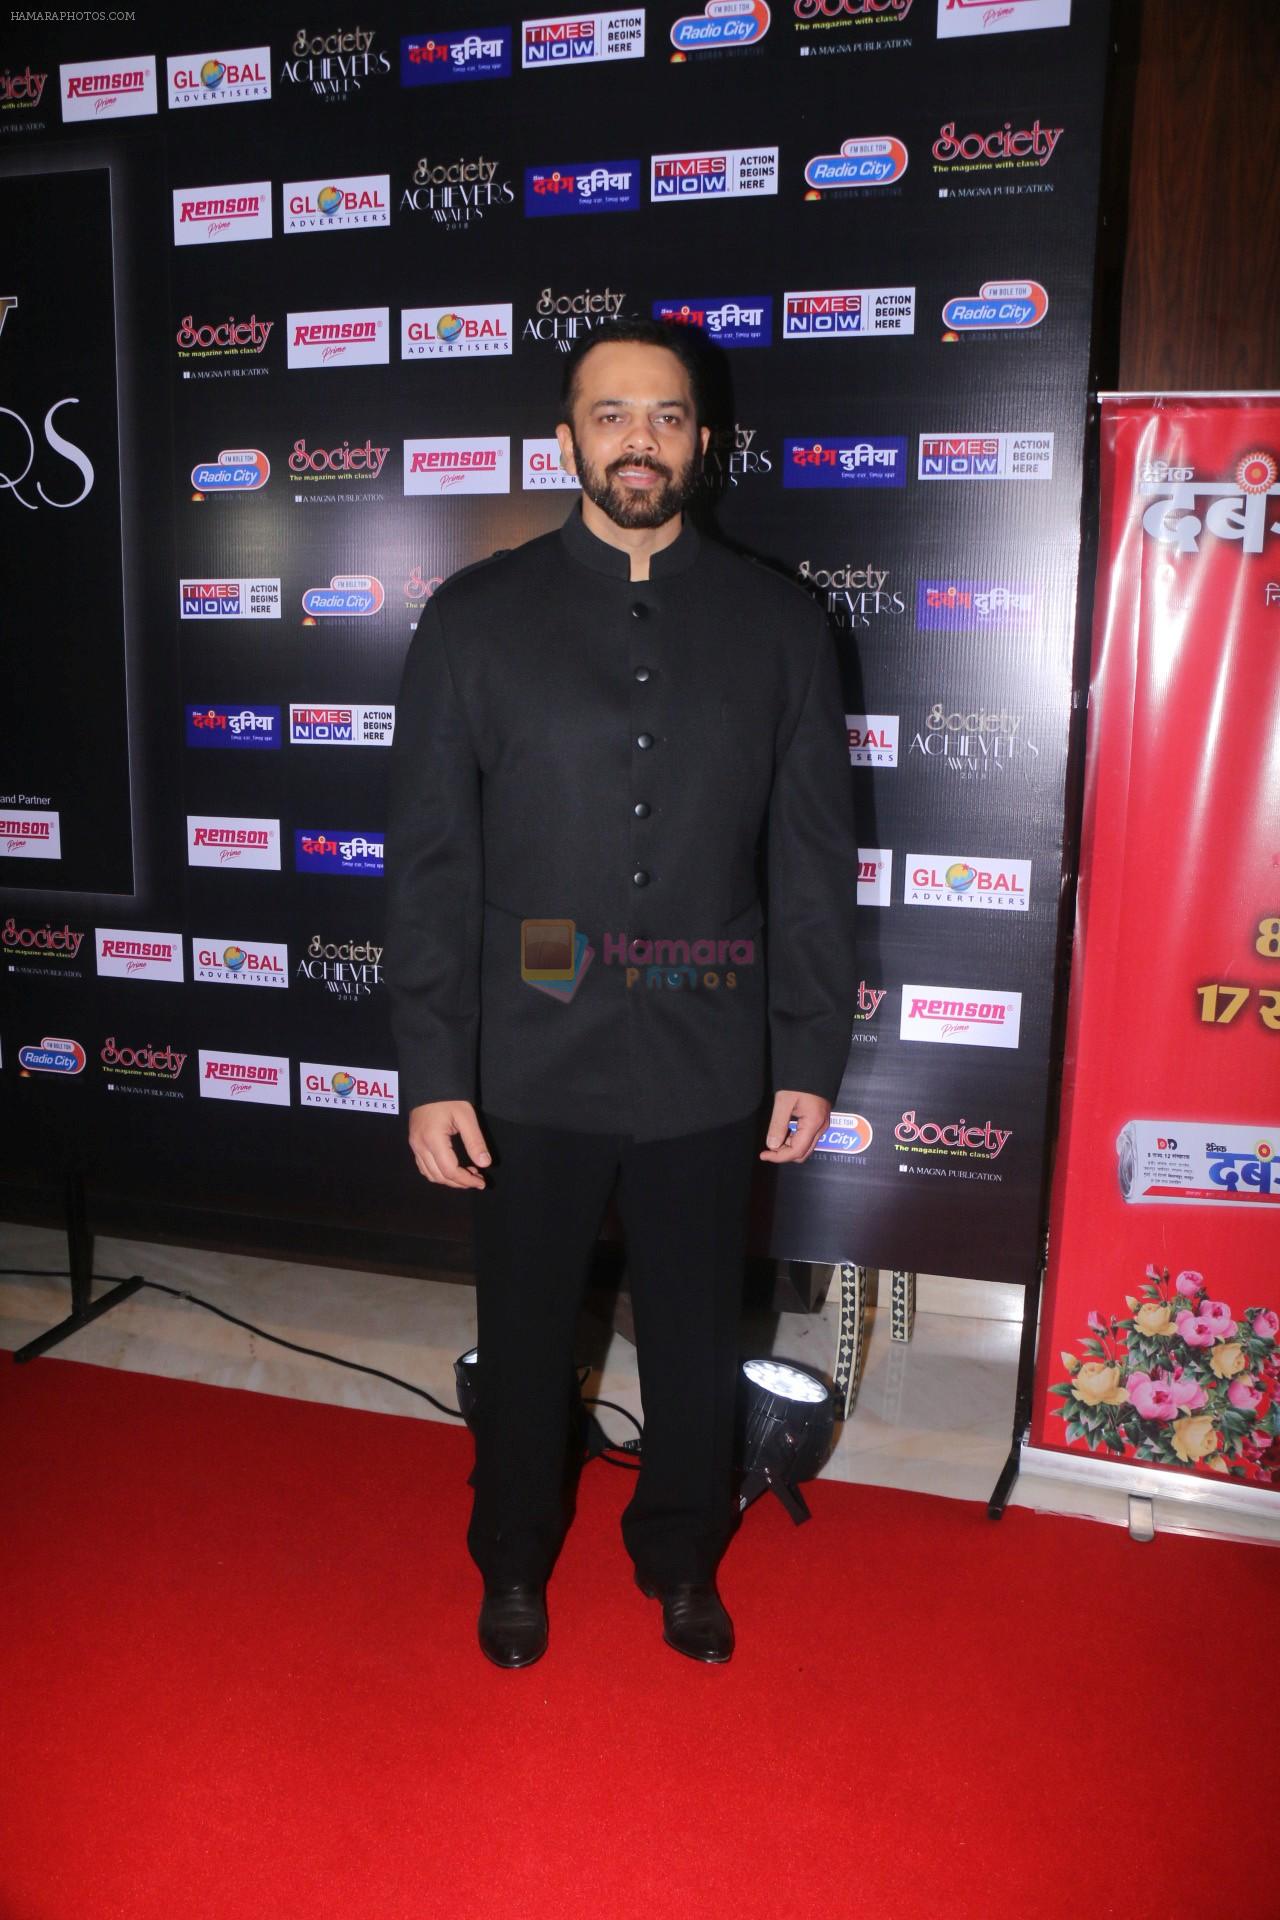 Rohit Shetty attend Society Achievers Awards 2018 on 14th Jan 2018